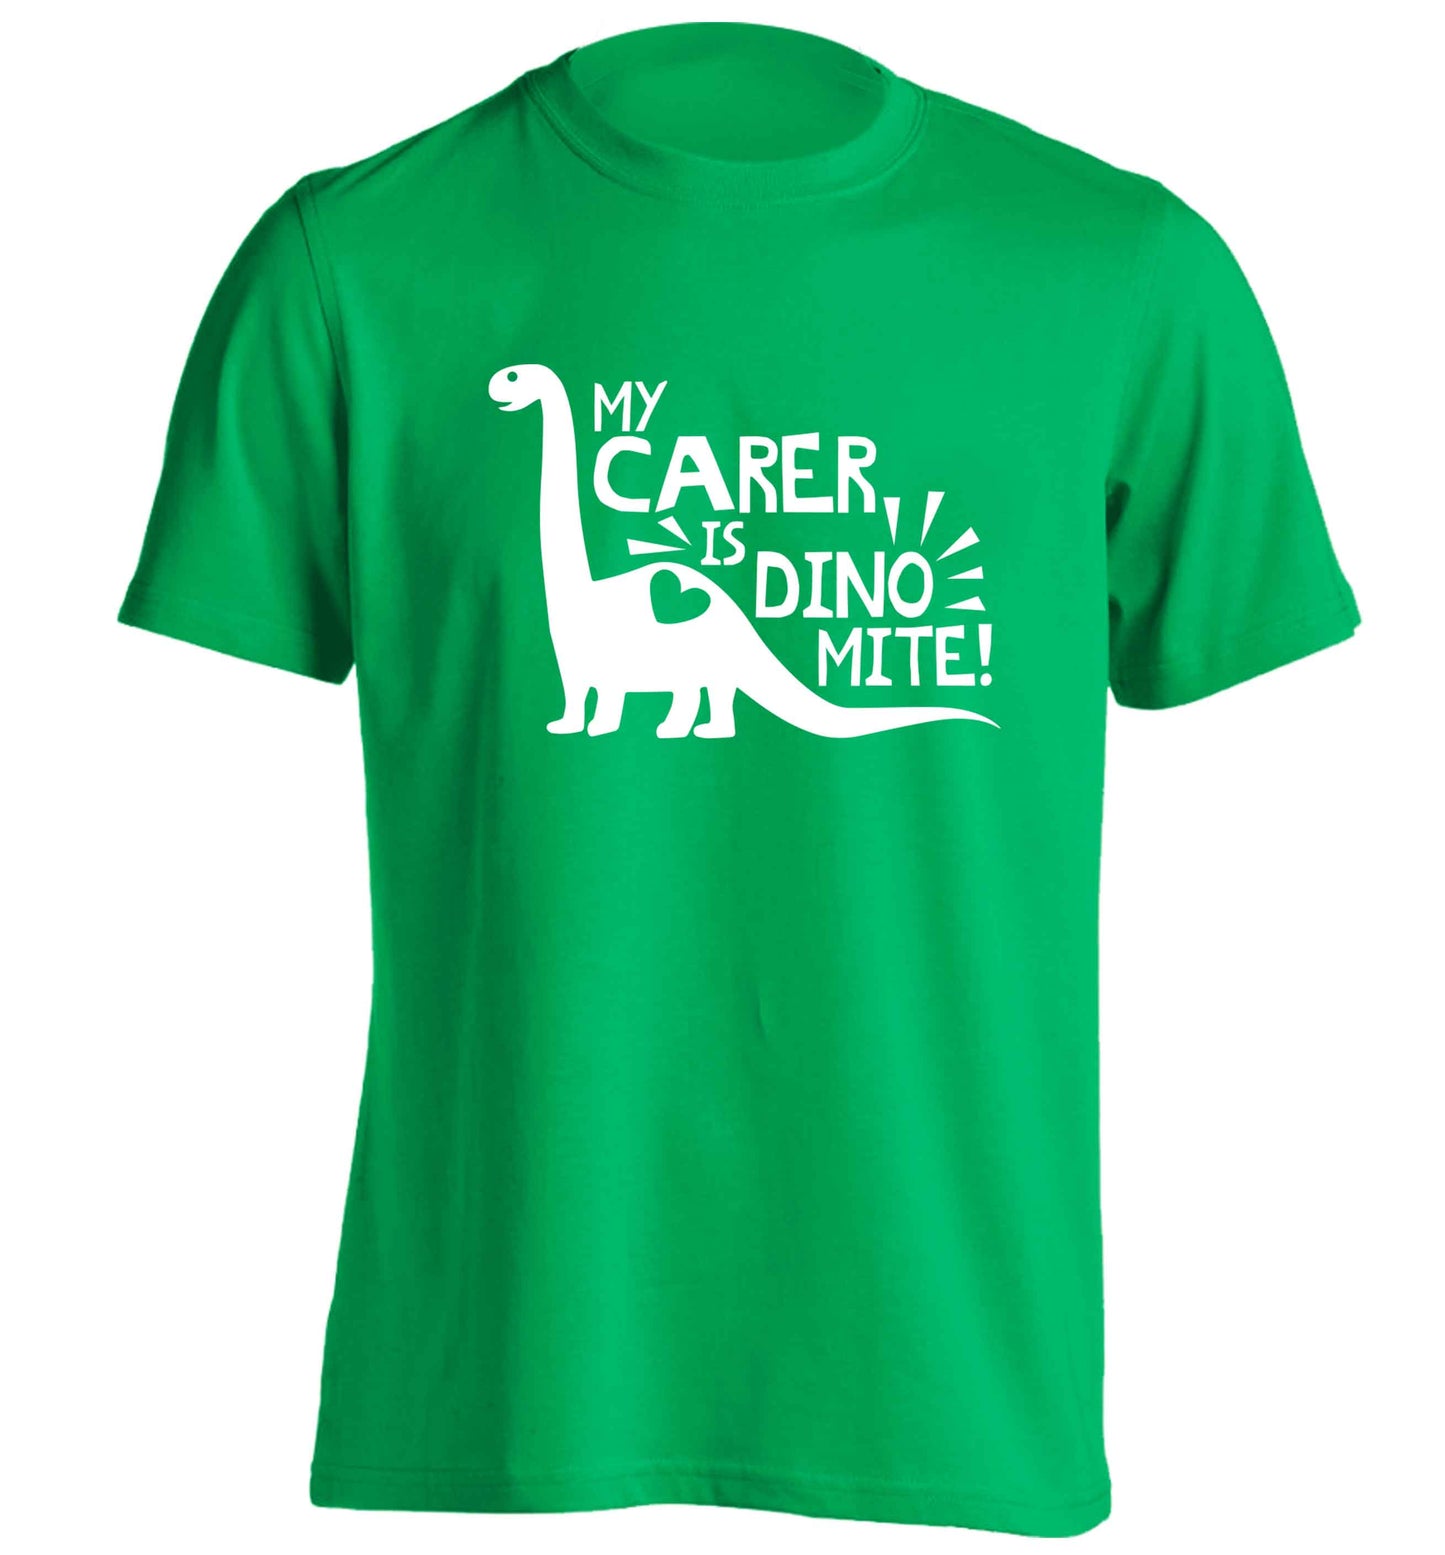 My carer is dinomite! adults unisex green Tshirt 2XL